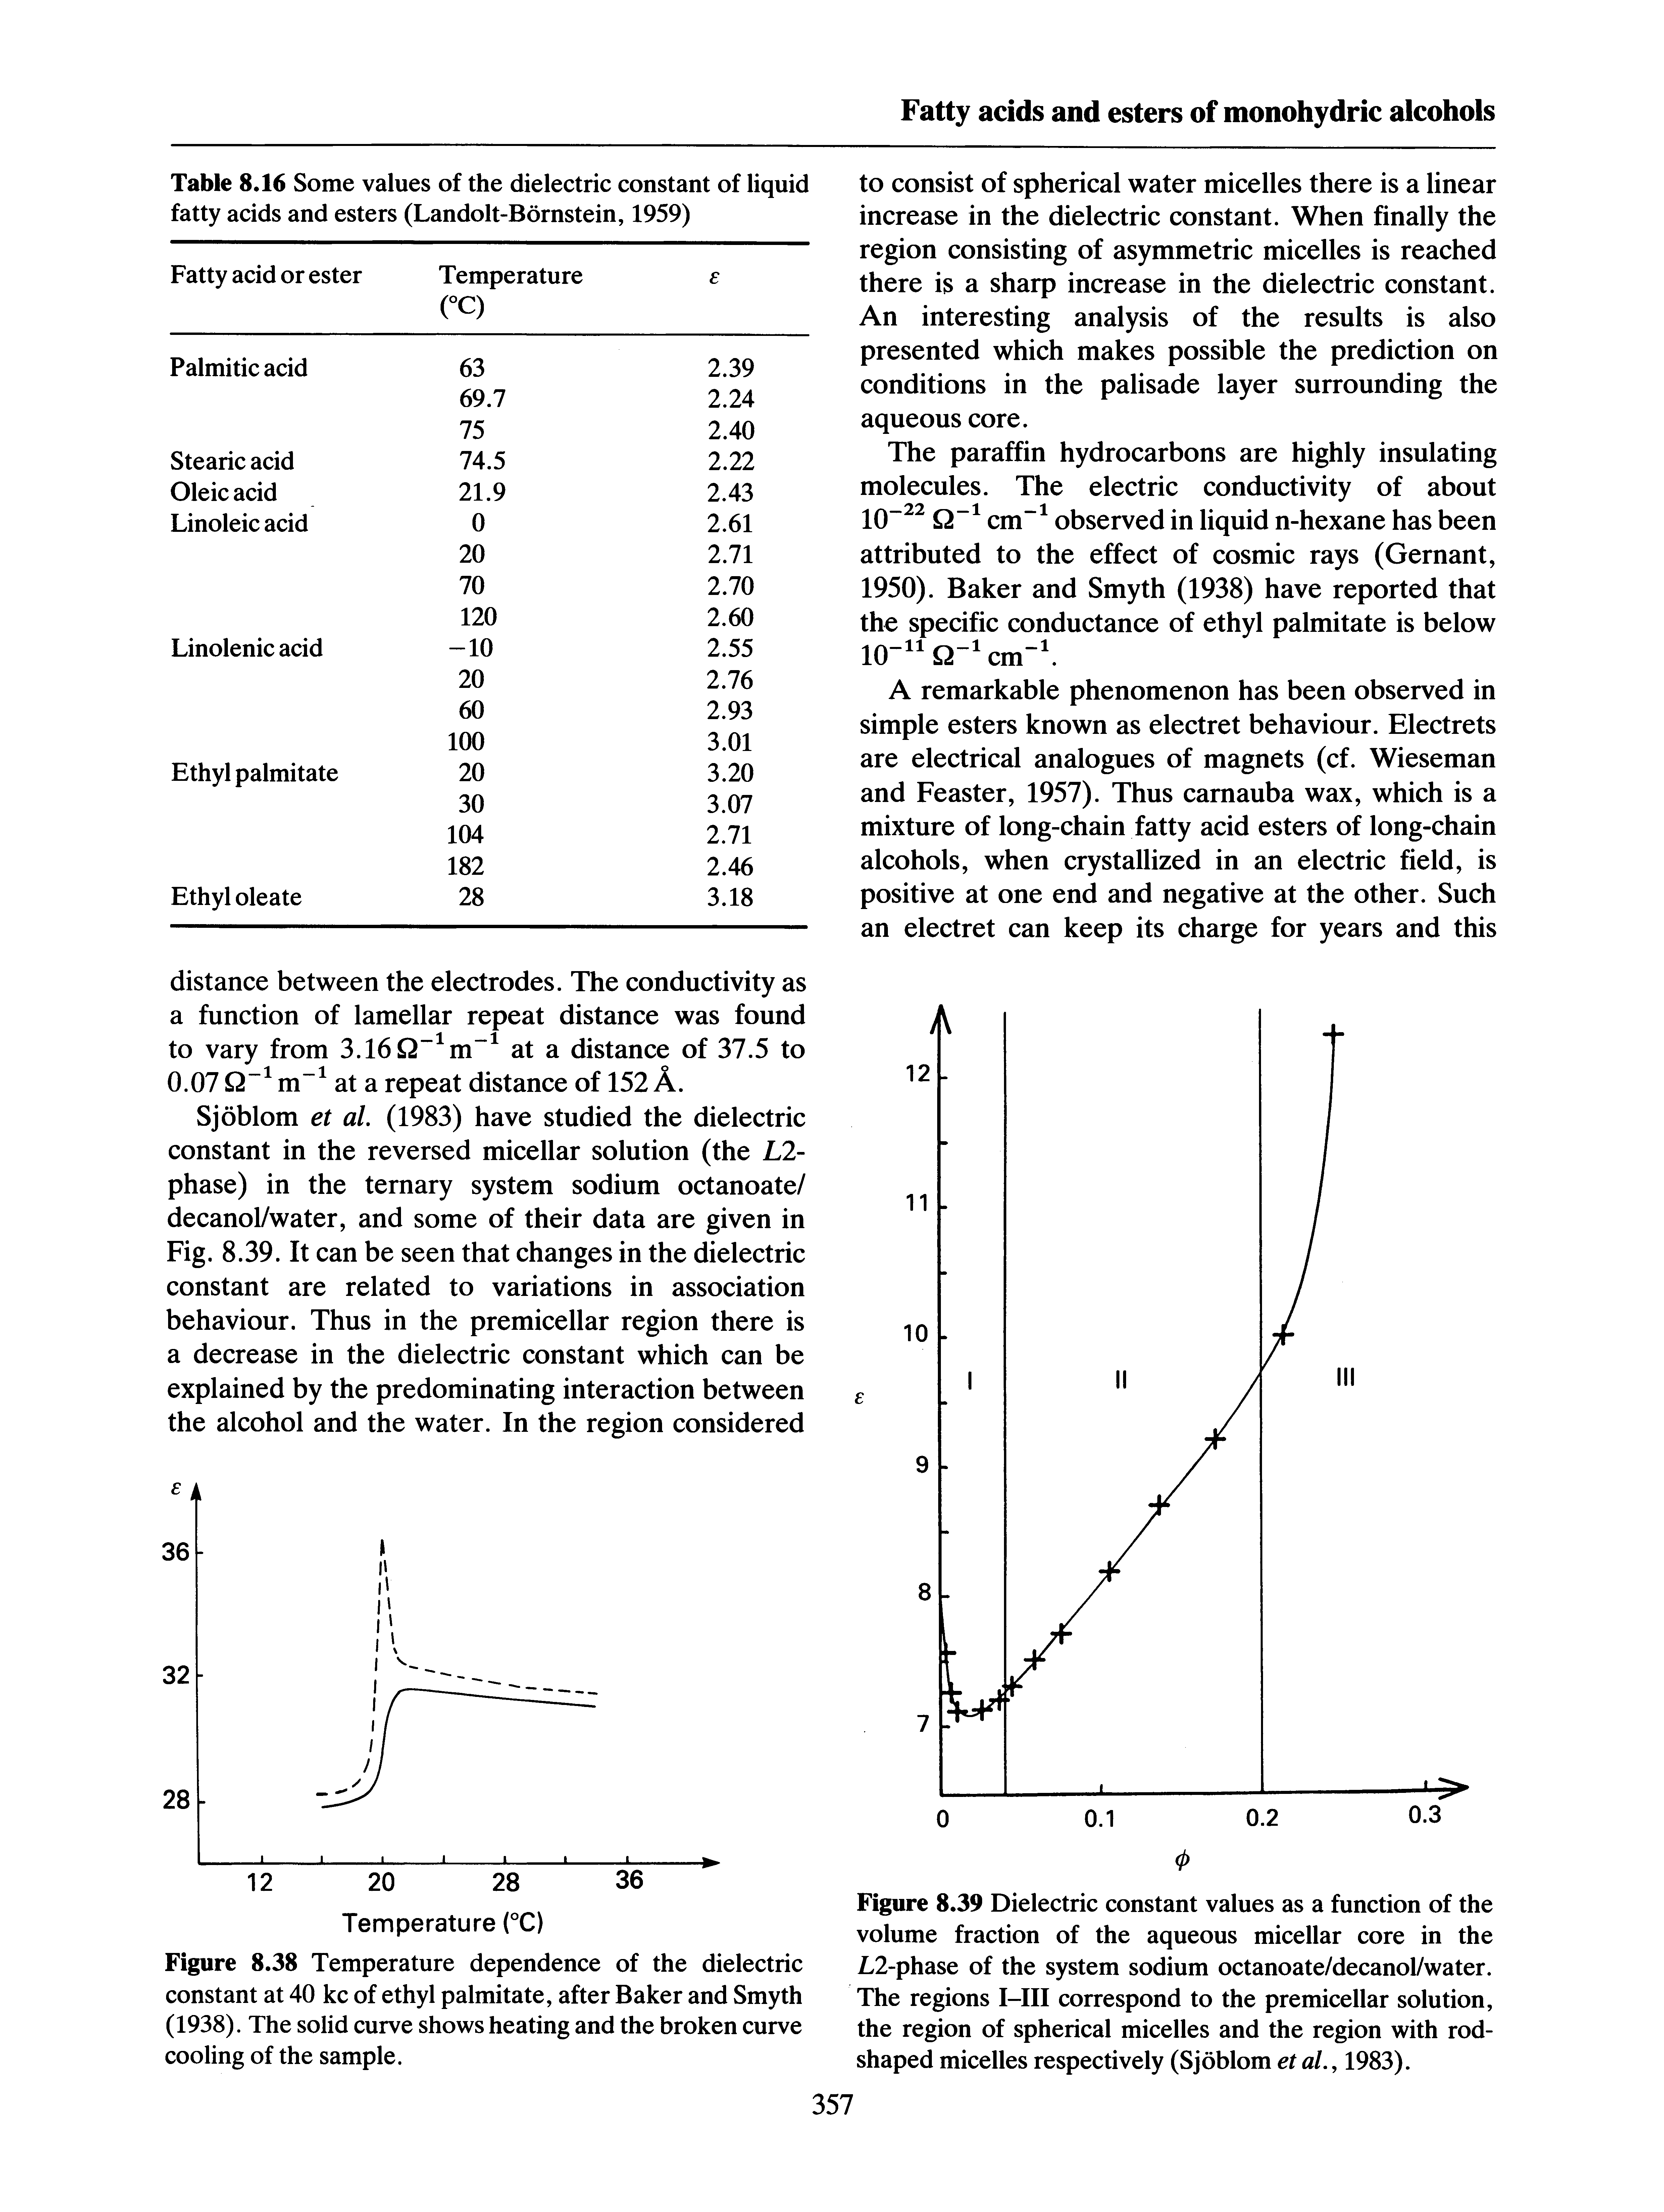 Figure 8.39 Dielectric constant values as a function of the volume fraction of the aqueous micellar core in the L2-phase of the system sodium octanoate/decanol/water. The regions I-III correspond to the premicellar solution, the region of spherical micelles and the region with rod-shaped micelles respectively (Sjoblom et aL, 1983).